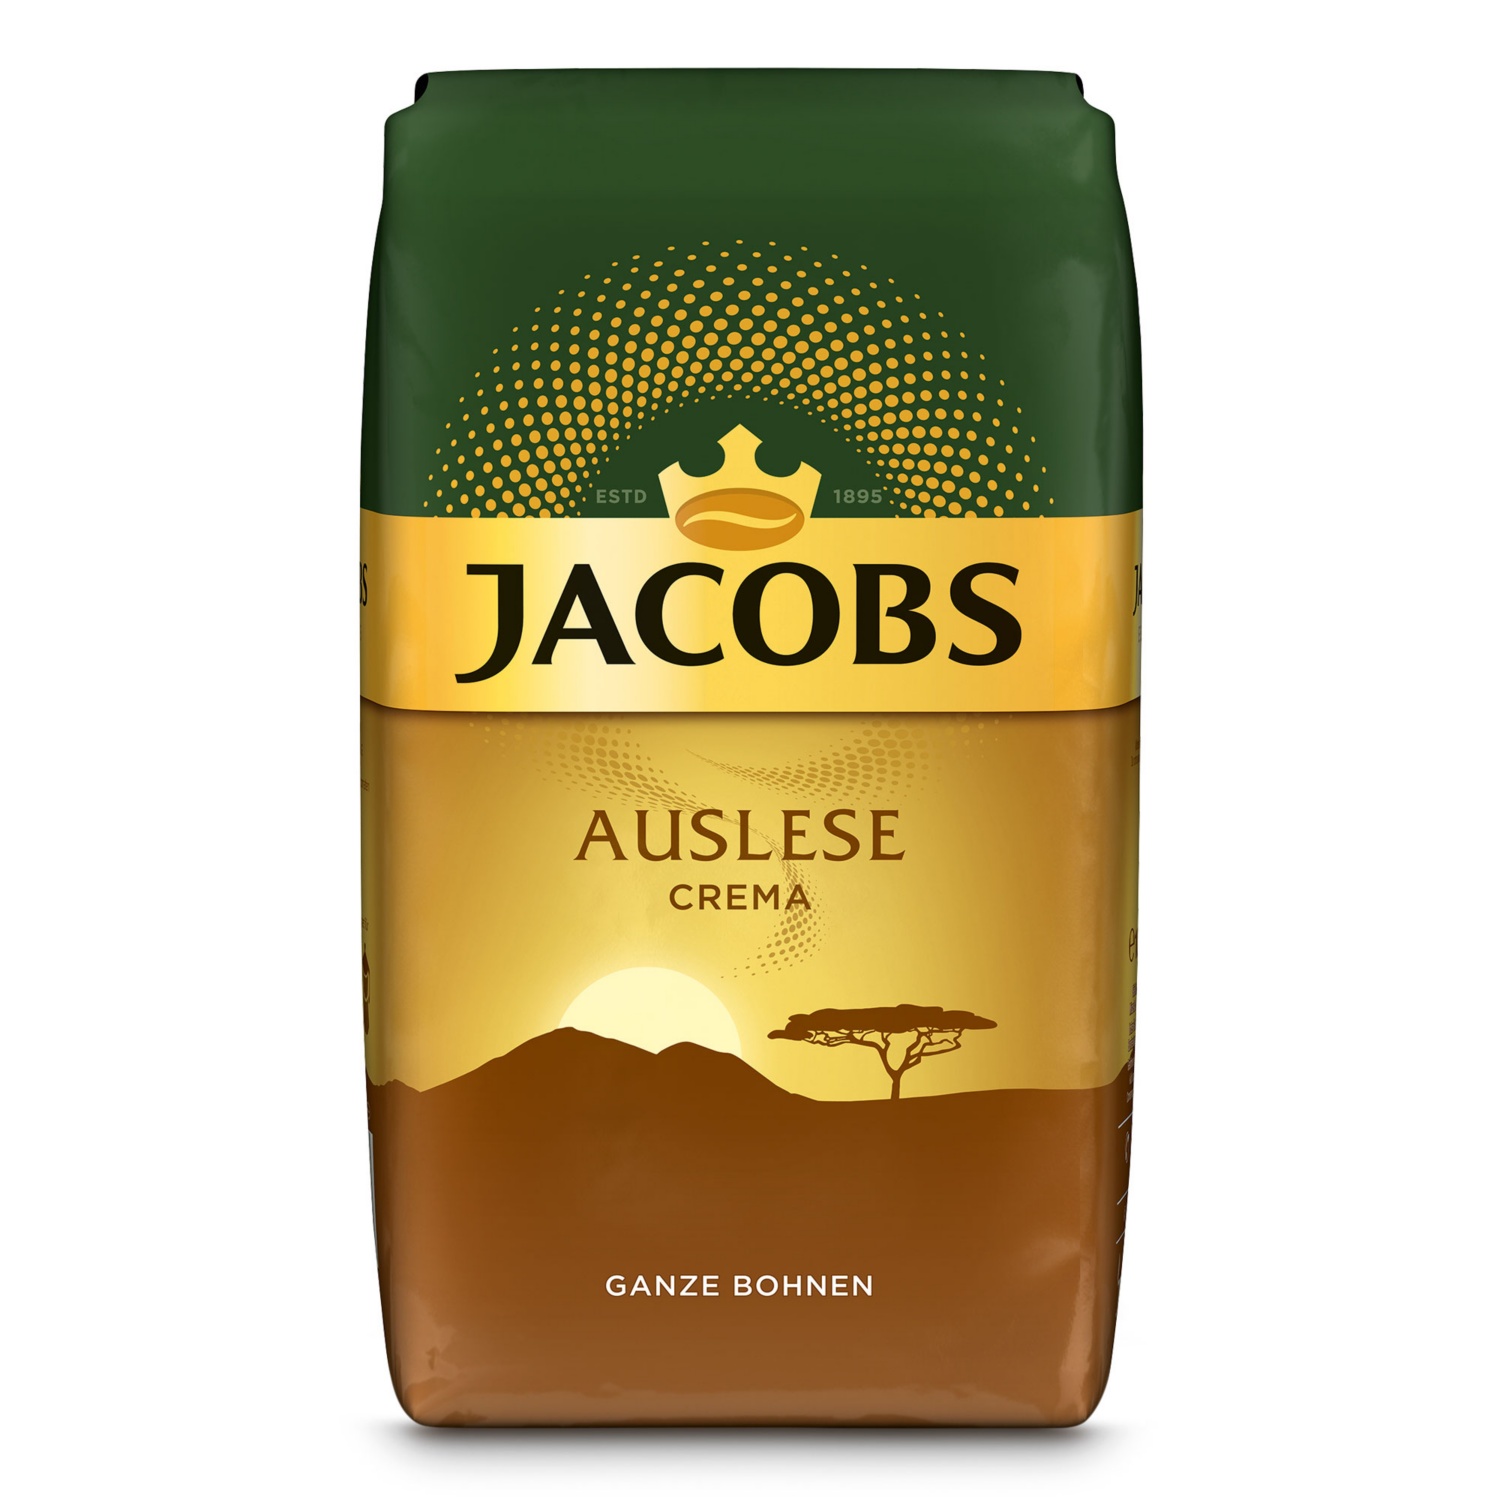 JACOBS Auslese Crema